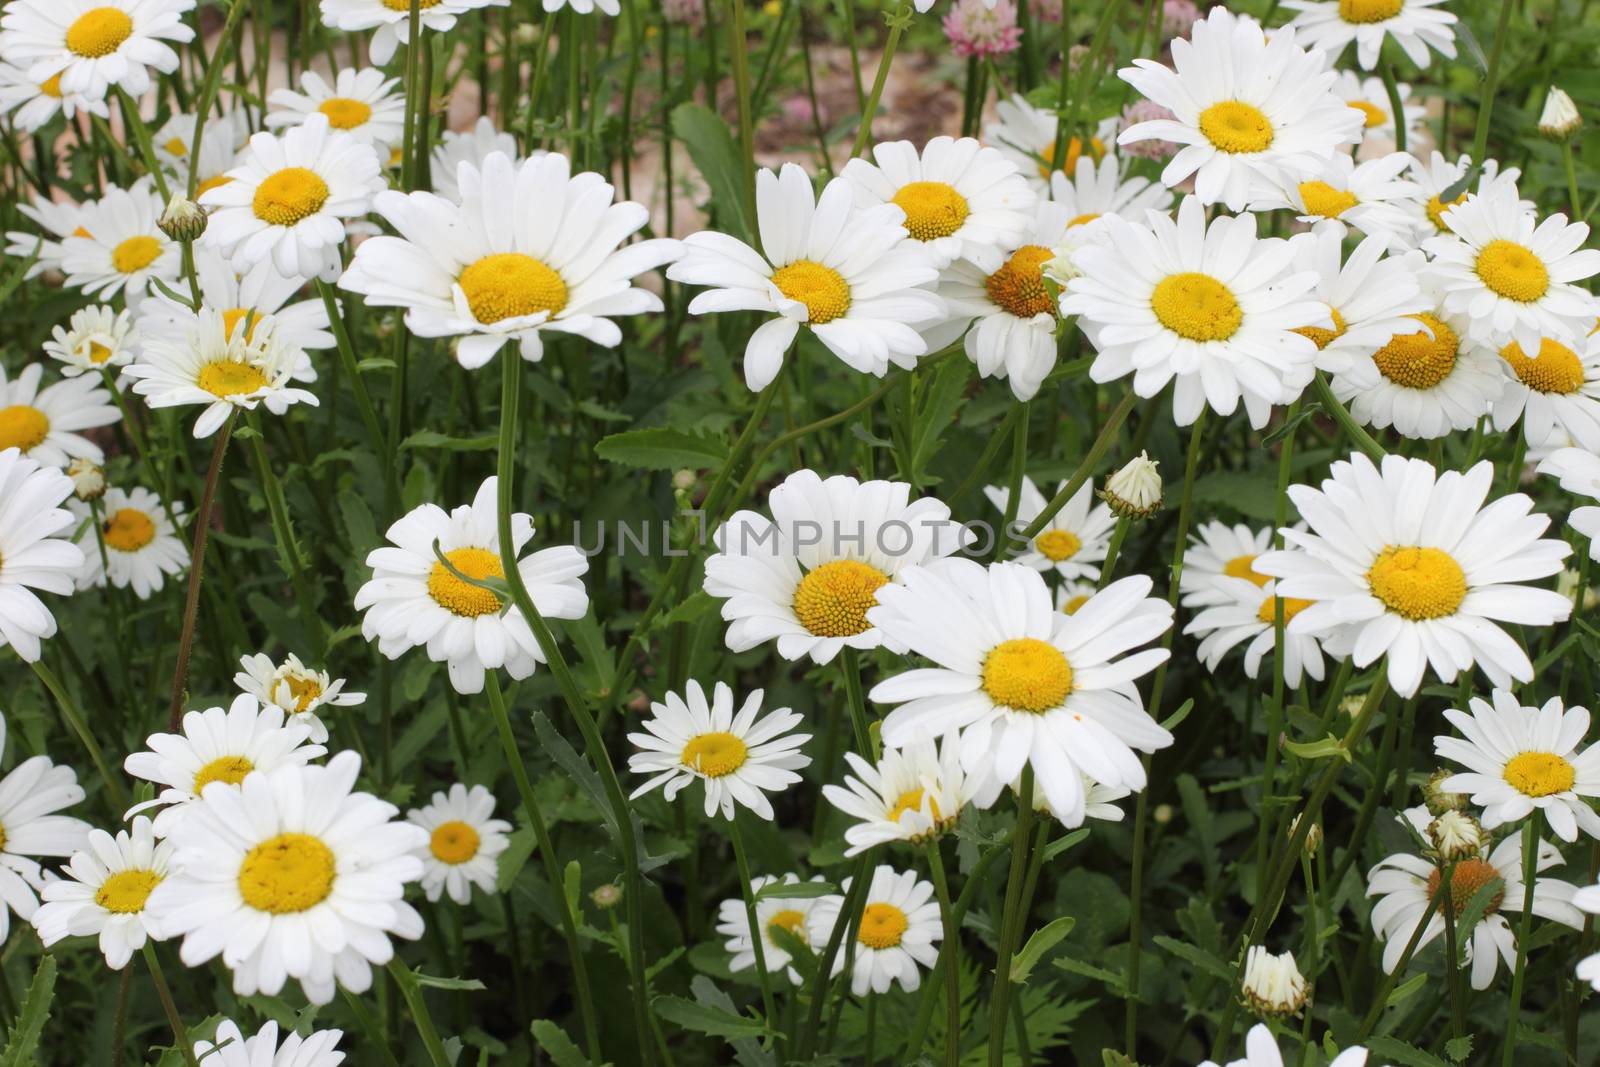 Many daisies in the garden by Metanna